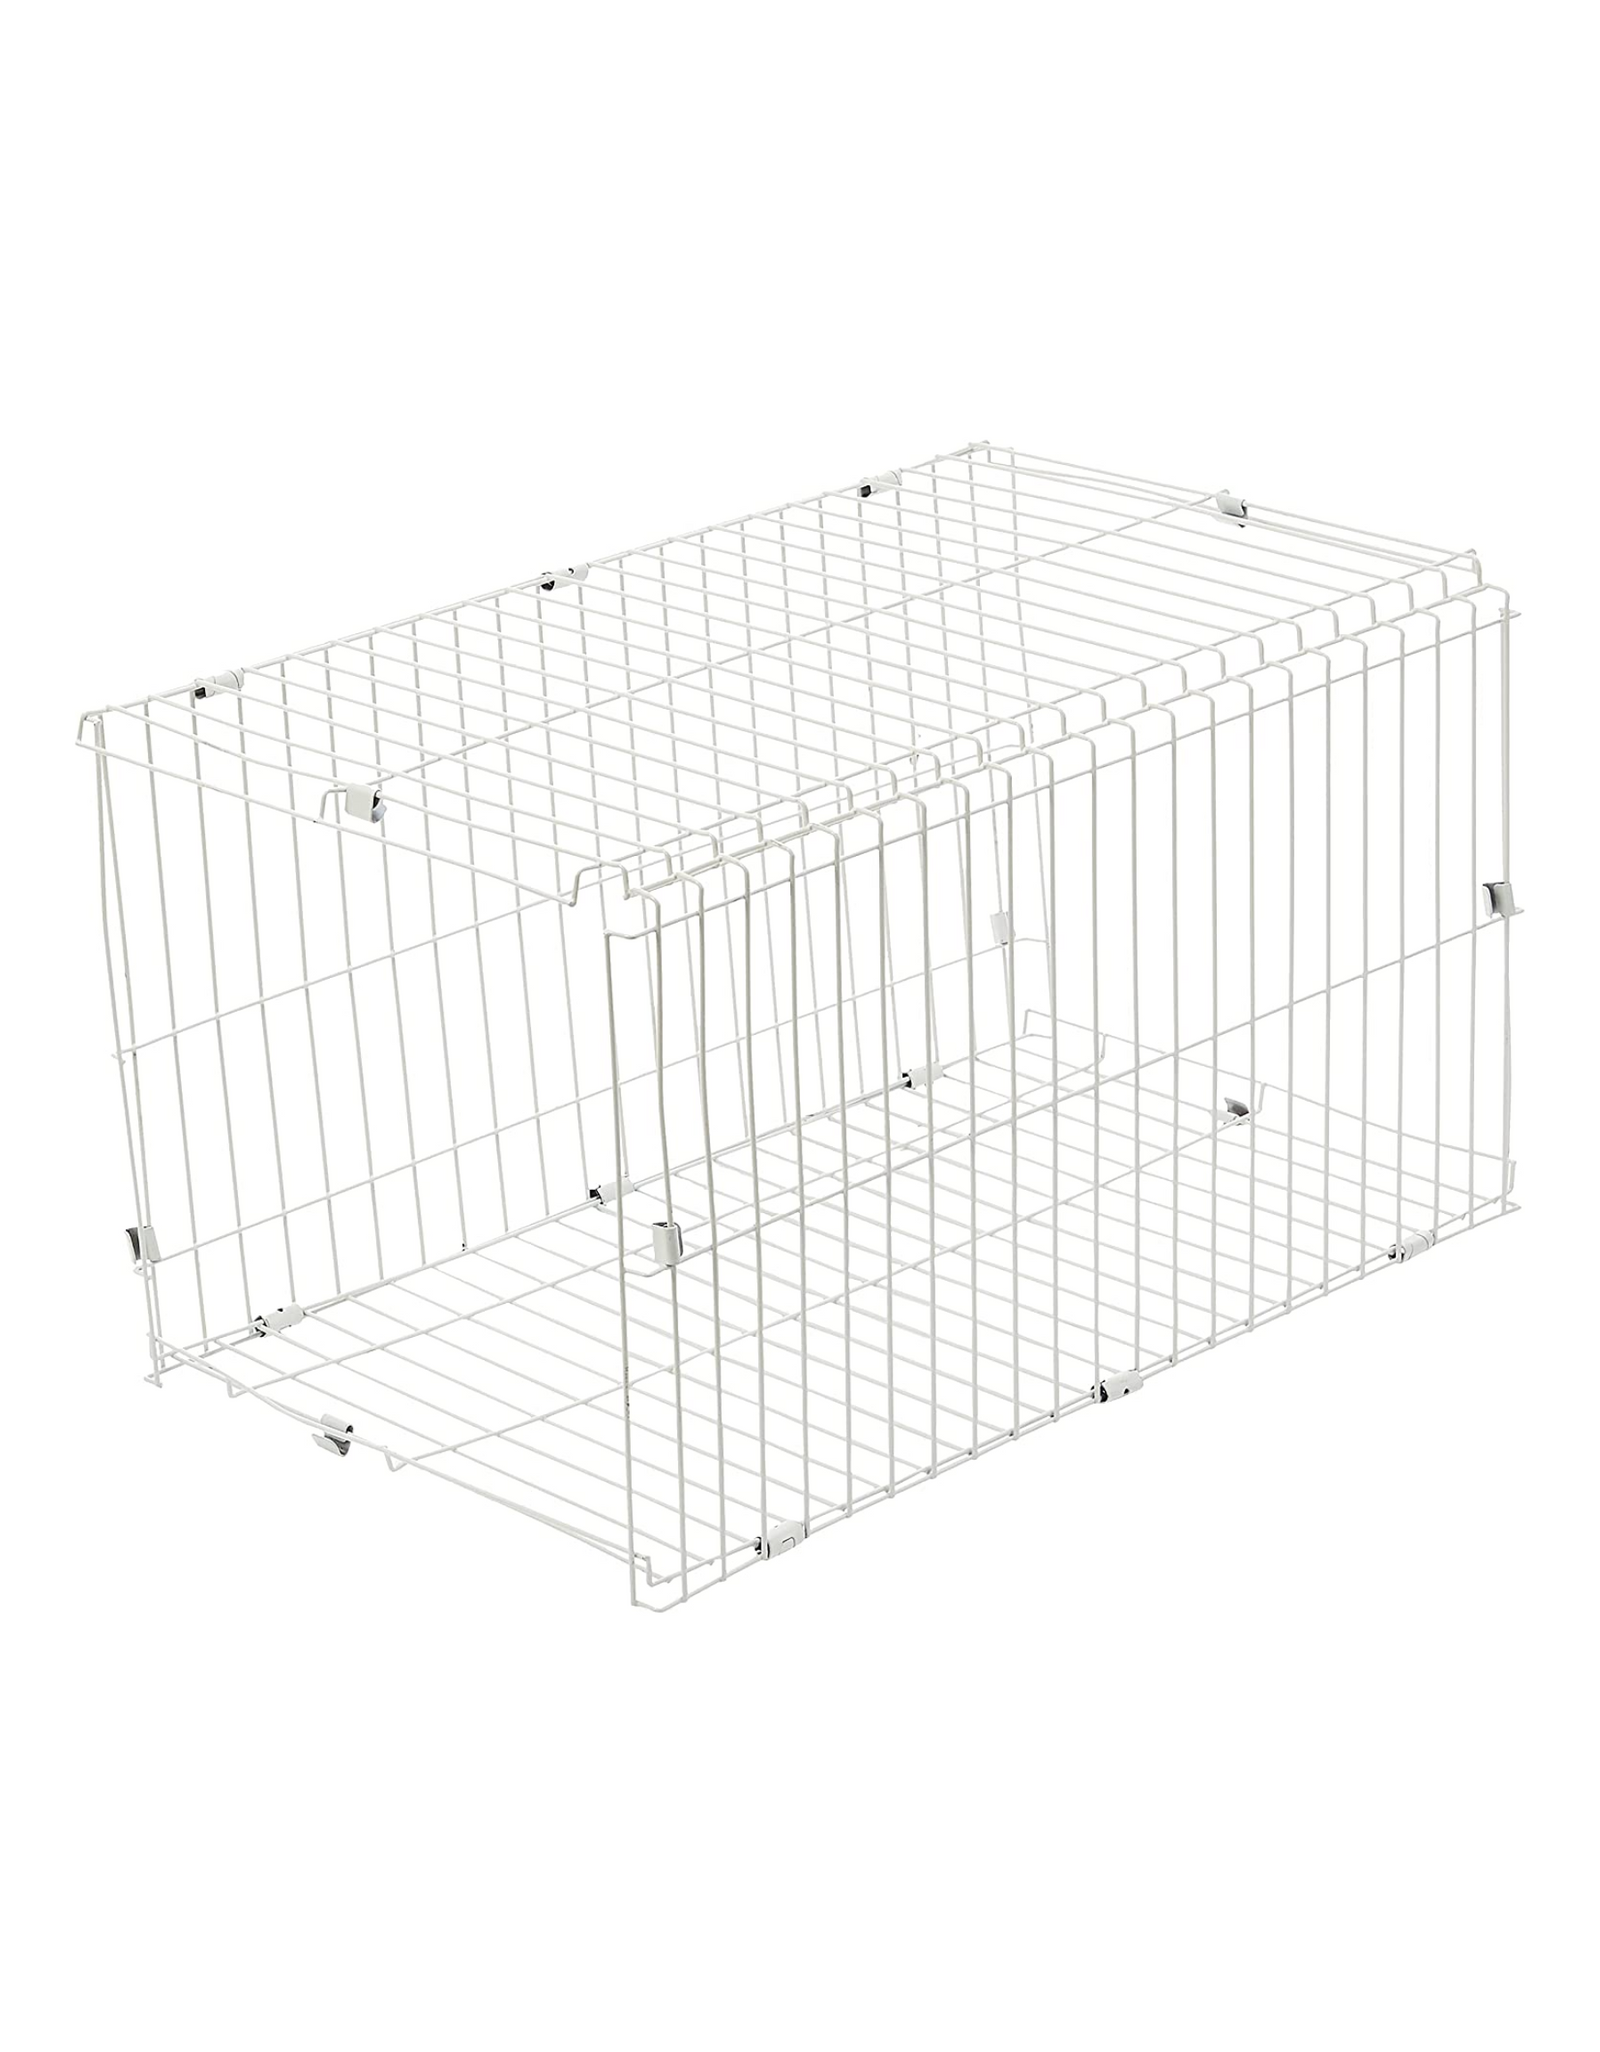 Top Panel for Guinea Pig Habitat and Guinea Pig Habitat Plus by Midwest